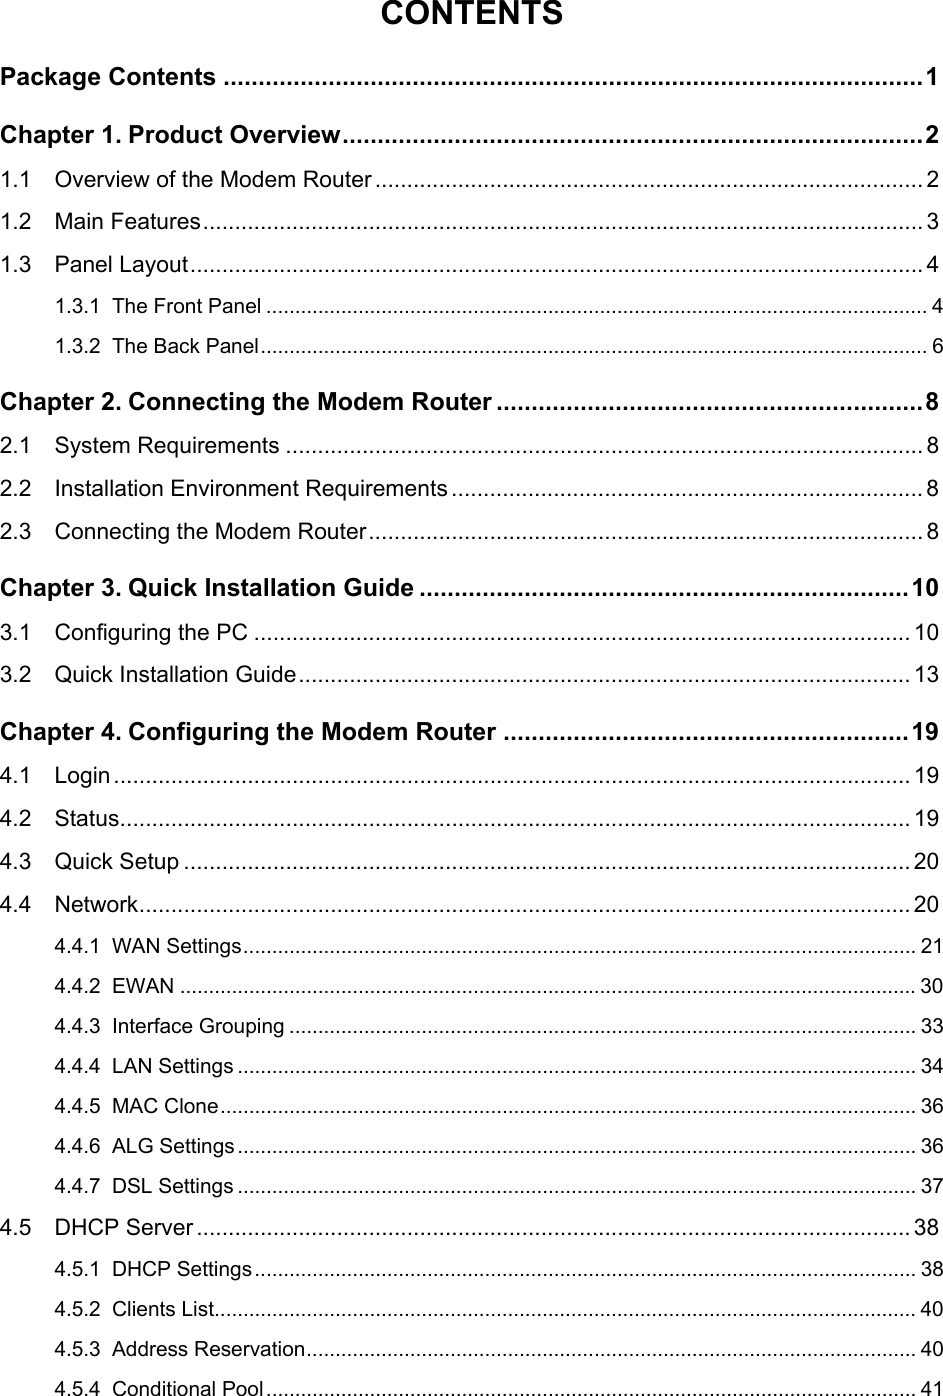  CONTENTS Package Contents ....................................................................................................1 Chapter 1. Product Overview...................................................................................2 1.1 Overview of the Modem Router ...................................................................................... 2 1.2 Main Features................................................................................................................. 3 1.3 Panel Layout................................................................................................................... 4 1.3.1 The Front Panel ................................................................................................................... 4 1.3.2 The Back Panel.................................................................................................................... 6 Chapter 2. Connecting the Modem Router .............................................................8 2.1 System Requirements .................................................................................................... 8 2.2 Installation Environment Requirements .......................................................................... 8 2.3 Connecting the Modem Router....................................................................................... 8 Chapter 3. Quick Installation Guide ......................................................................10 3.1 Configuring the PC .......................................................................................................10 3.2 Quick Installation Guide................................................................................................ 13 Chapter 4. Configuring the Modem Router ..........................................................19 4.1 Login............................................................................................................................. 19 4.2 Status............................................................................................................................ 19 4.3 Quick Setup .................................................................................................................. 20 4.4 Network......................................................................................................................... 20 4.4.1 WAN Settings..................................................................................................................... 21 4.4.2 EWAN ................................................................................................................................30 4.4.3 Interface Grouping ............................................................................................................. 33 4.4.4 LAN Settings ...................................................................................................................... 34 4.4.5 MAC Clone......................................................................................................................... 36 4.4.6 ALG Settings...................................................................................................................... 36 4.4.7 DSL Settings ...................................................................................................................... 37 4.5 DHCP Server................................................................................................................ 38 4.5.1 DHCP Settings................................................................................................................... 38 4.5.2 Clients List.......................................................................................................................... 40 4.5.3 Address Reservation.......................................................................................................... 40 4.5.4 Conditional Pool................................................................................................................. 41  